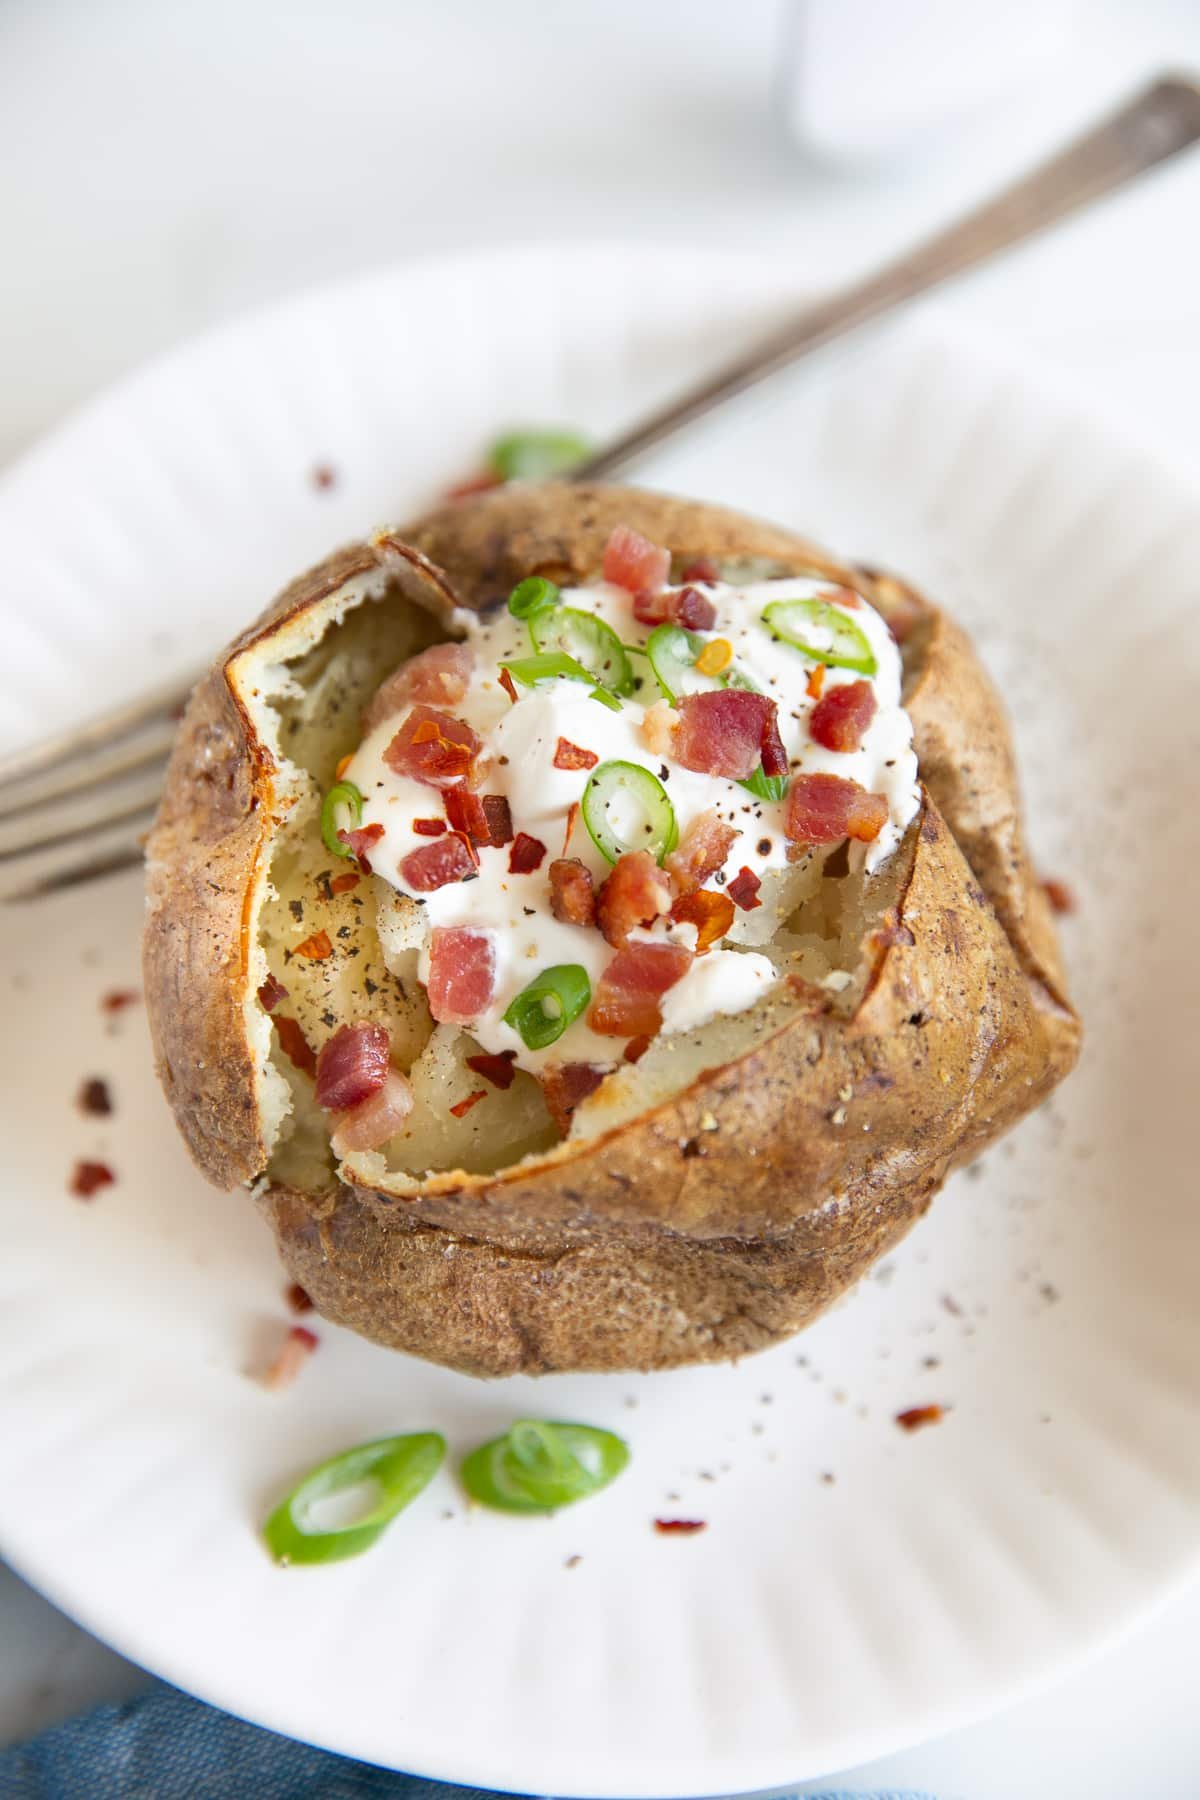 Small white plate with an air fryer baked potato sliced open and topped with sour cream, bacon bits, and green onions.